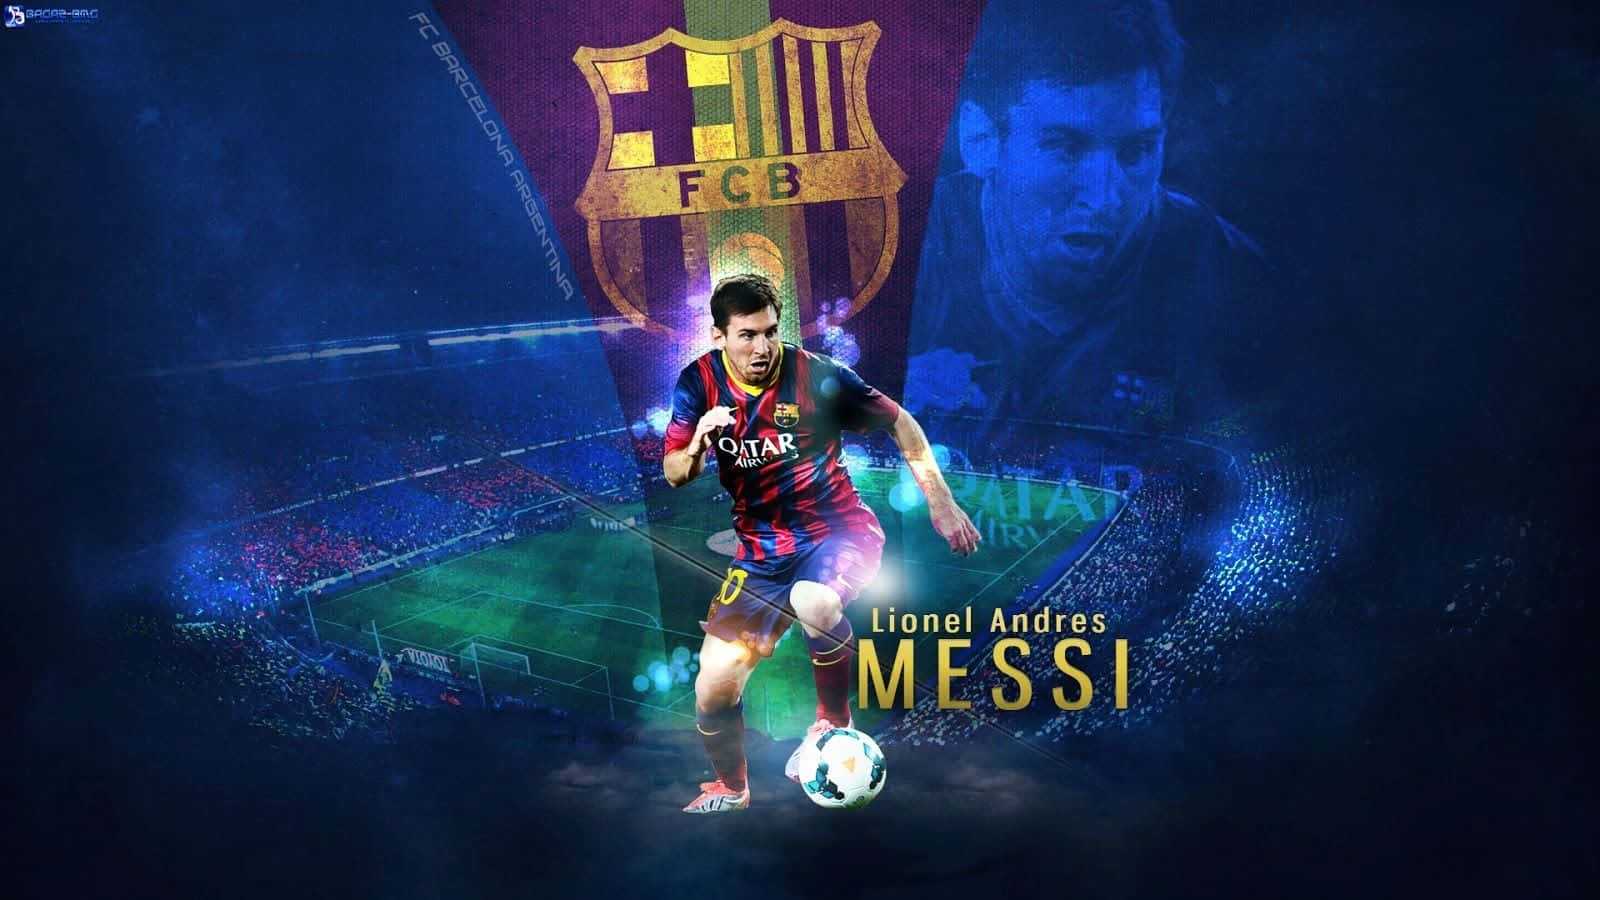 Lionel Messi In Action, Cool And Composed. Wallpaper